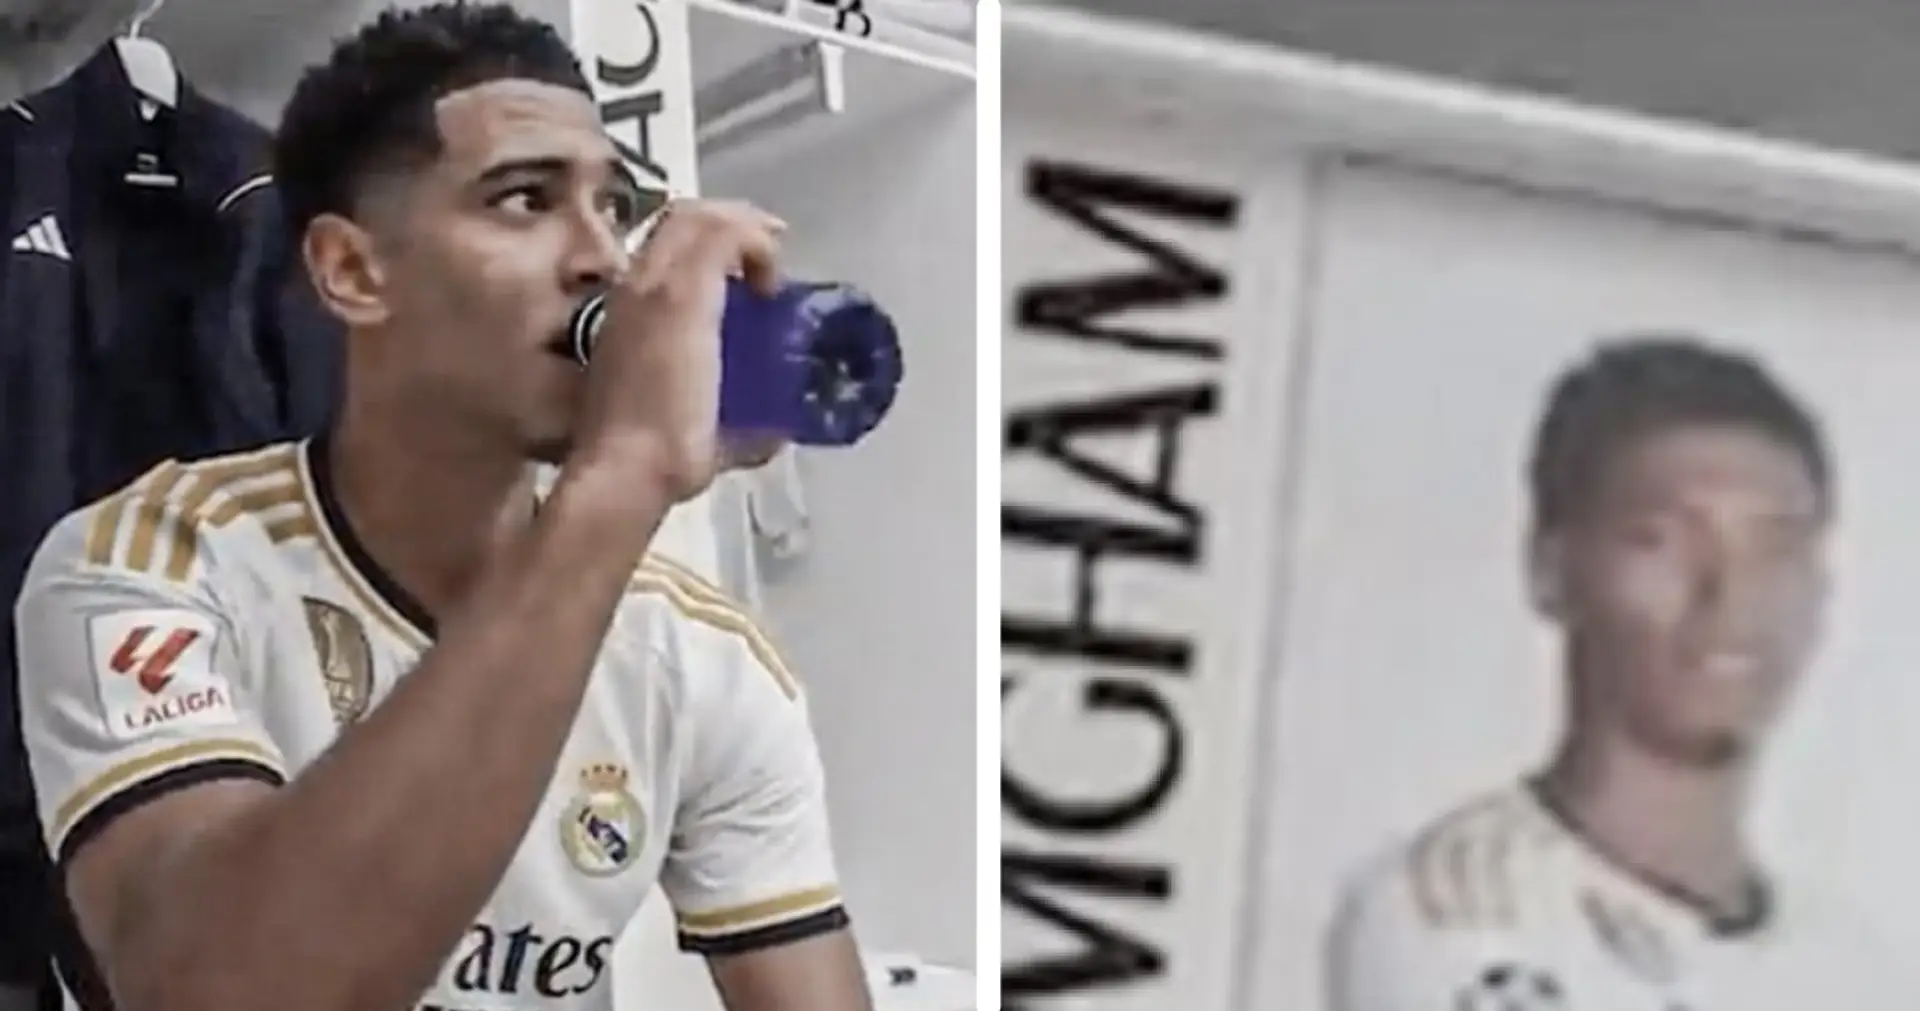 'Someone's losing their job': One huge screwup in Real Madrid's new locker room spotted